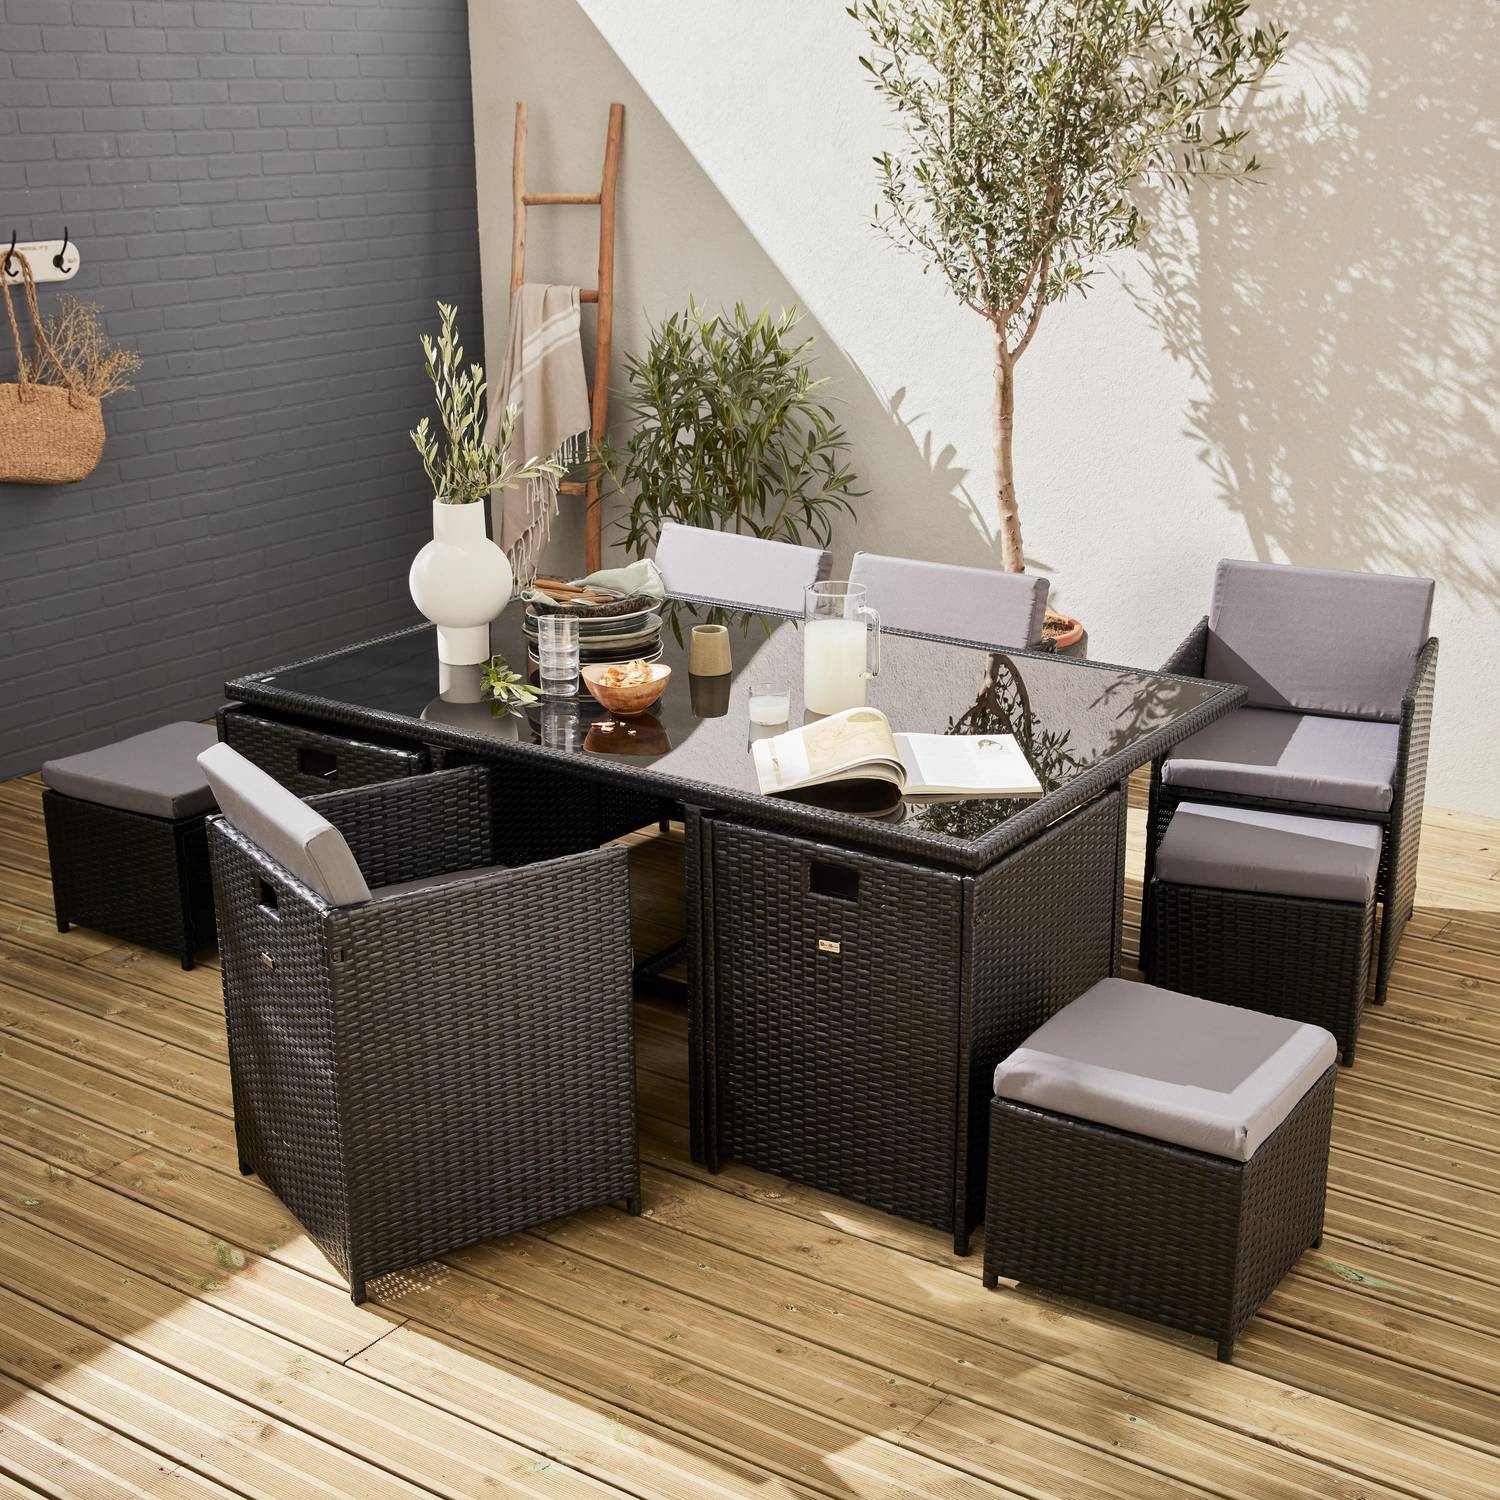 6 to 10-seater rattan cube table set - table, 6 armchairs, 2 footstools - Vabo 10 - Black rattan, Grey cushions Photo1